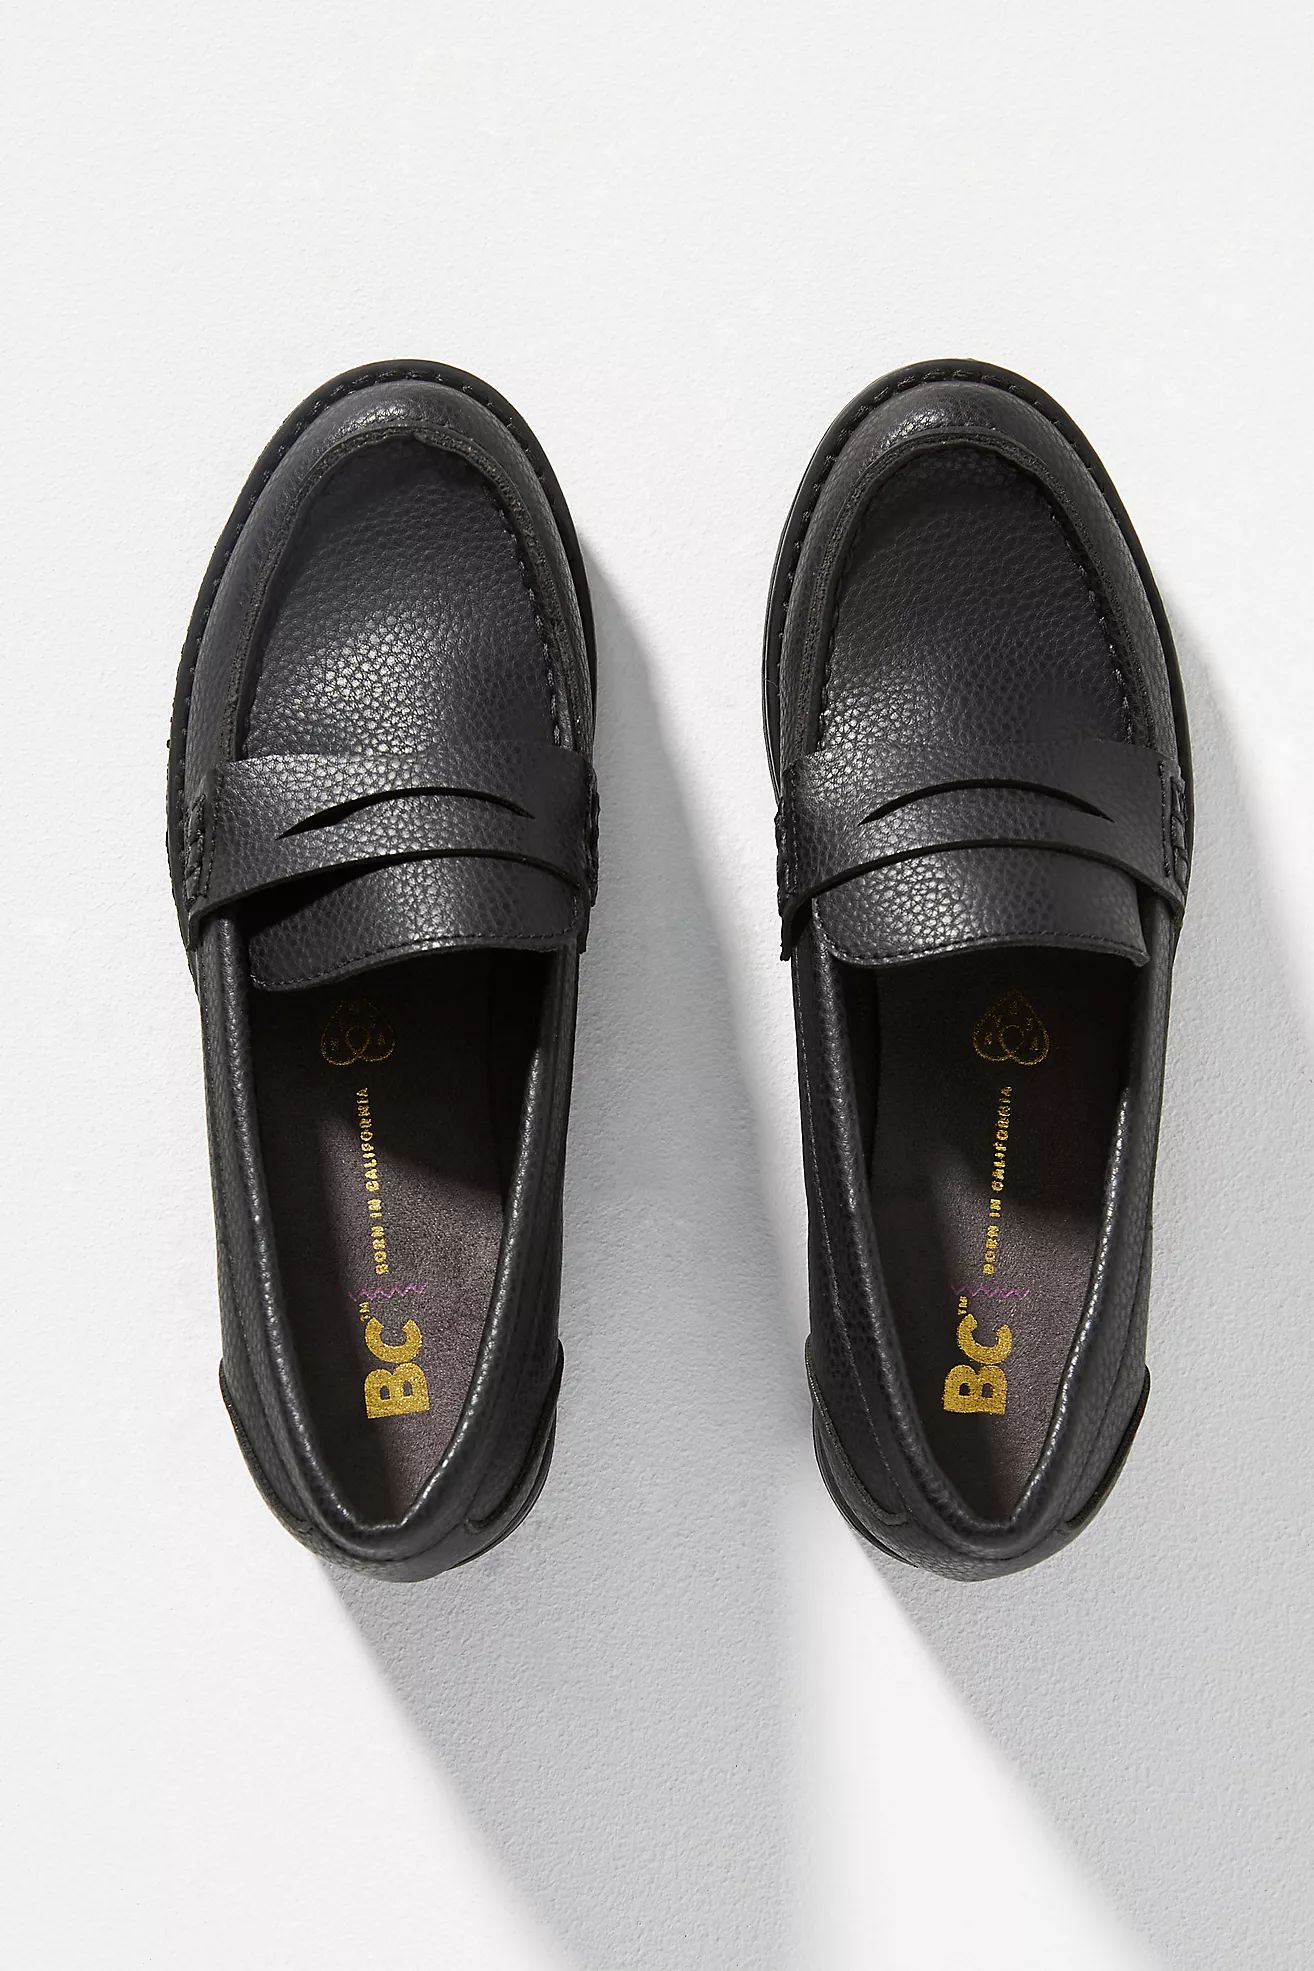 BC Footwear Roulette Loafers | Anthropologie (US)